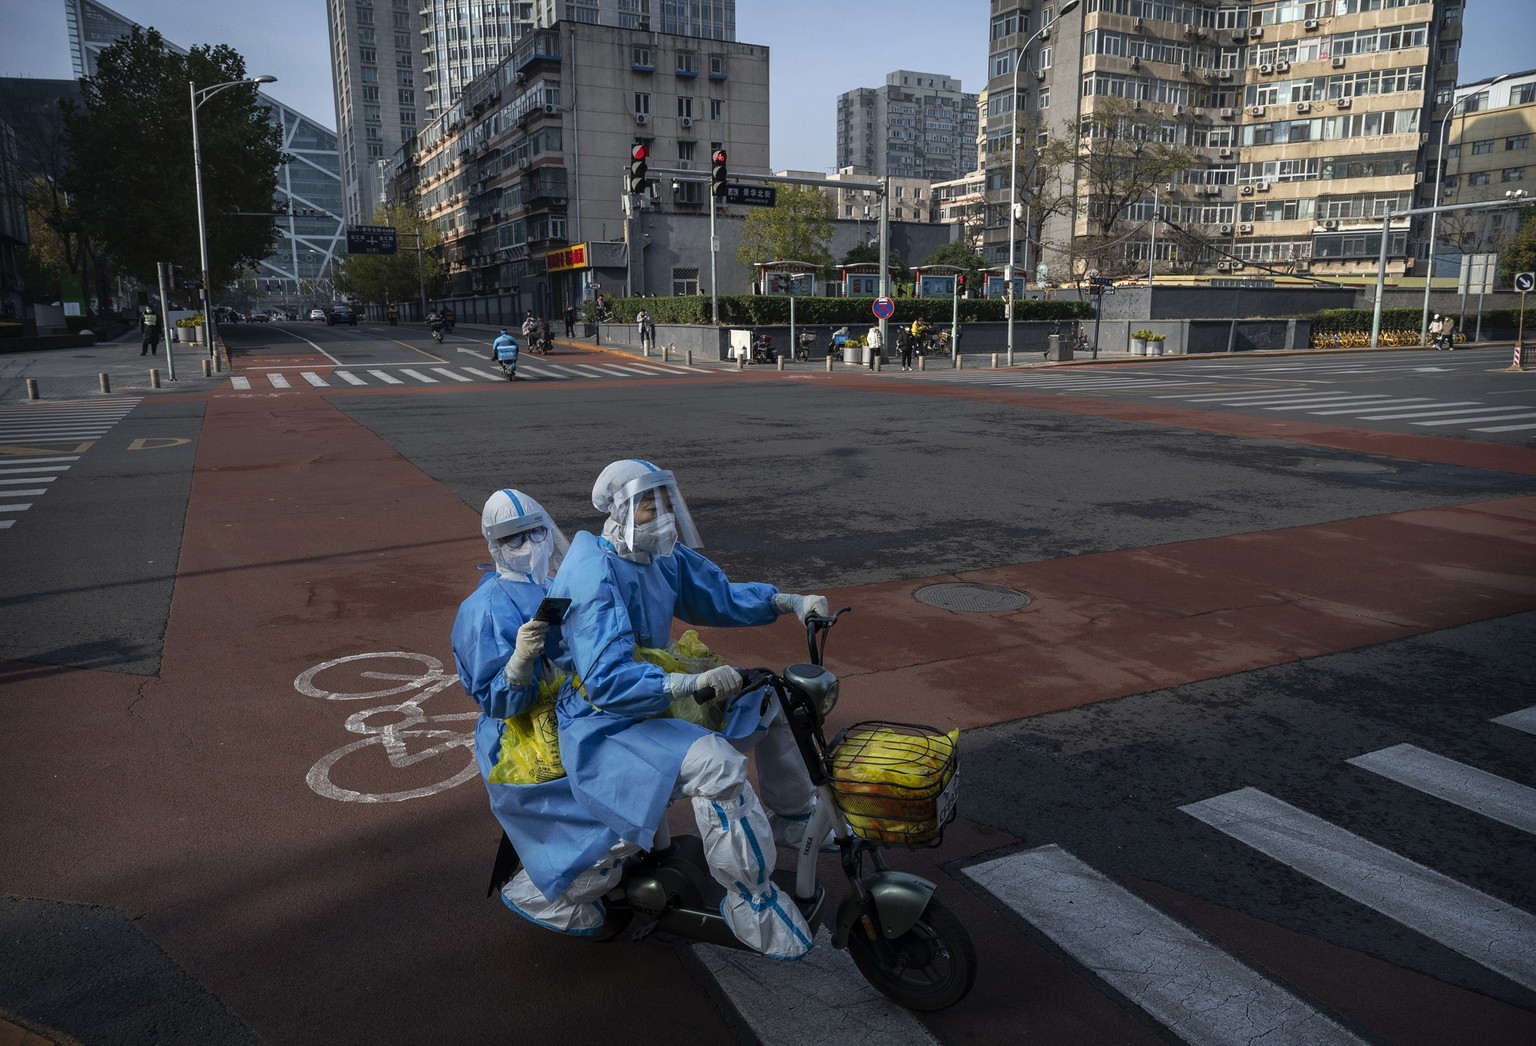 BEIJING, CHINA - NOVEMBER 23: Epidemic control workers who perform nucleic acid tests wear protective clothing to protect against the spread of COVID-19 as they ride shared bicycles in a nearly empty  ...